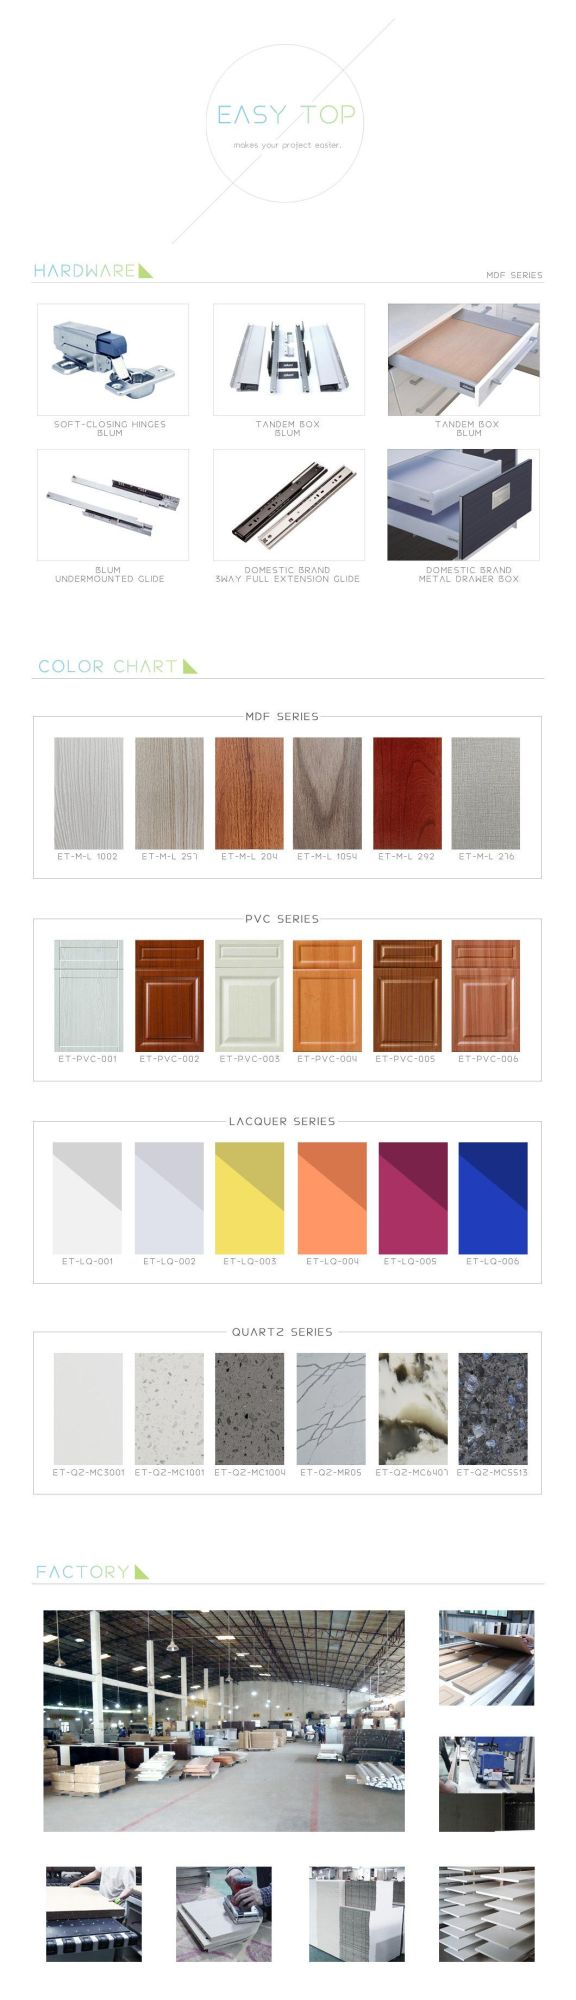 Cheap Price Modular Kitchen Pantry Cupboard Plywood Material MFC Kitchen Cabinet Design